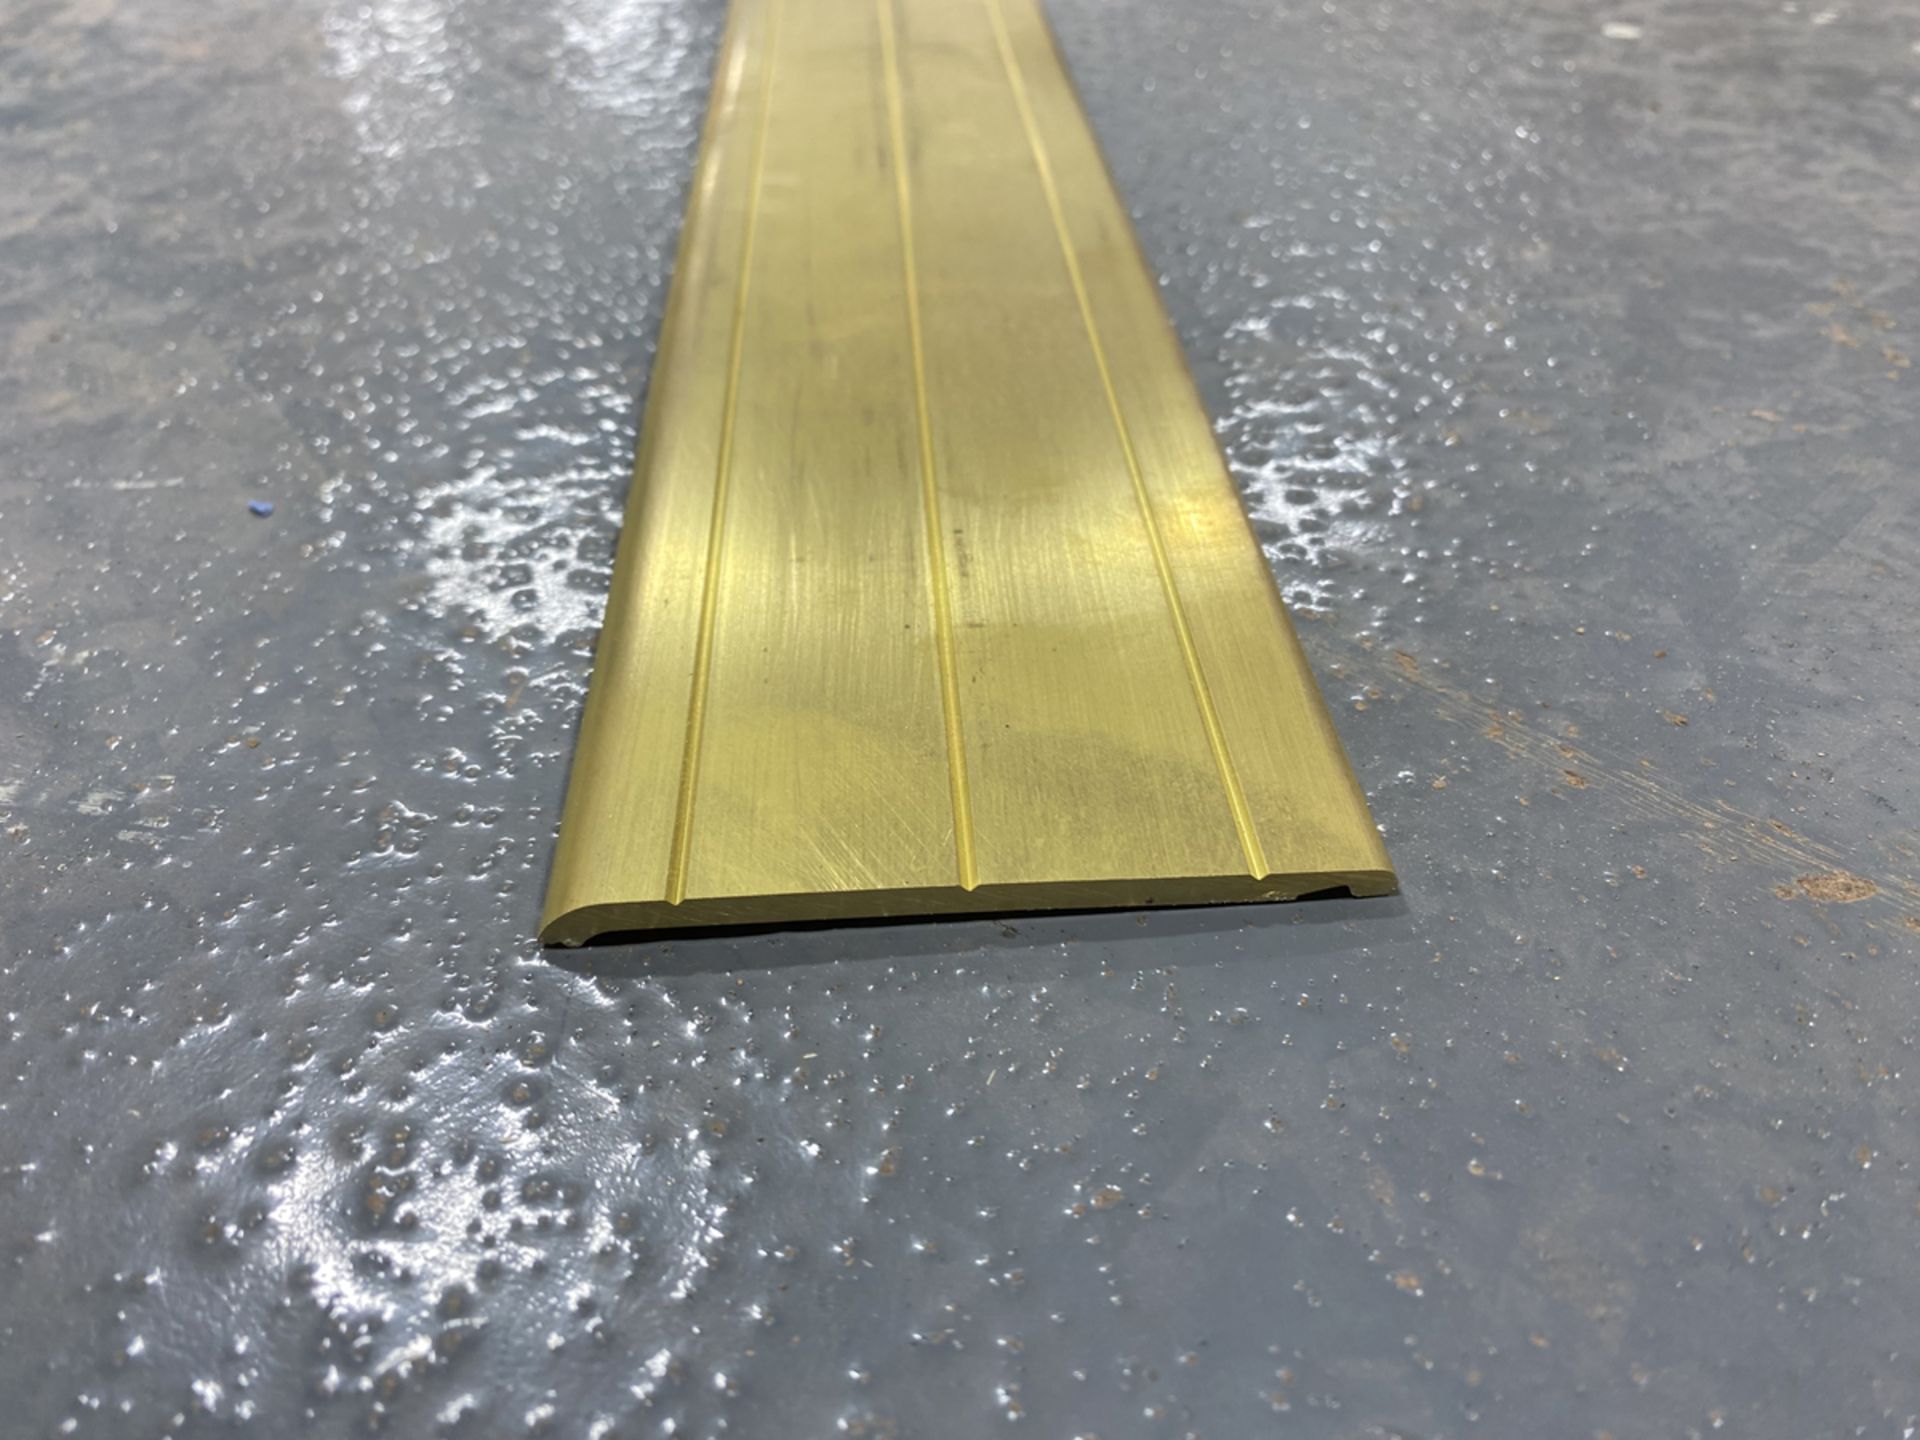 [Linear Foot] Architectural Bronze Thresholds (Brass) - Image 2 of 5